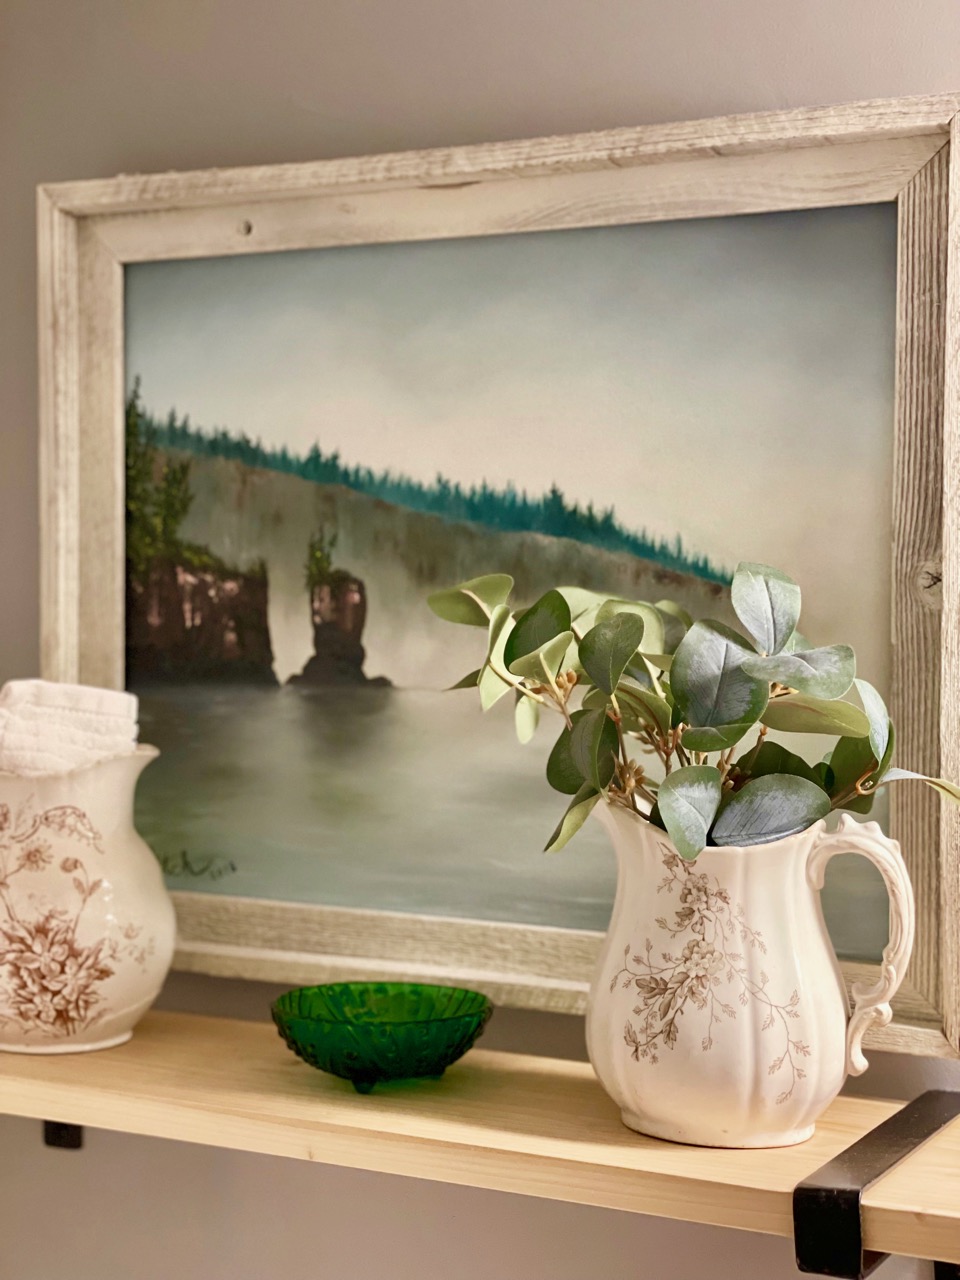 a modern wooden shelf disaplayed with antique transferware pitchers pairs nicely with a modern oil painting behind them